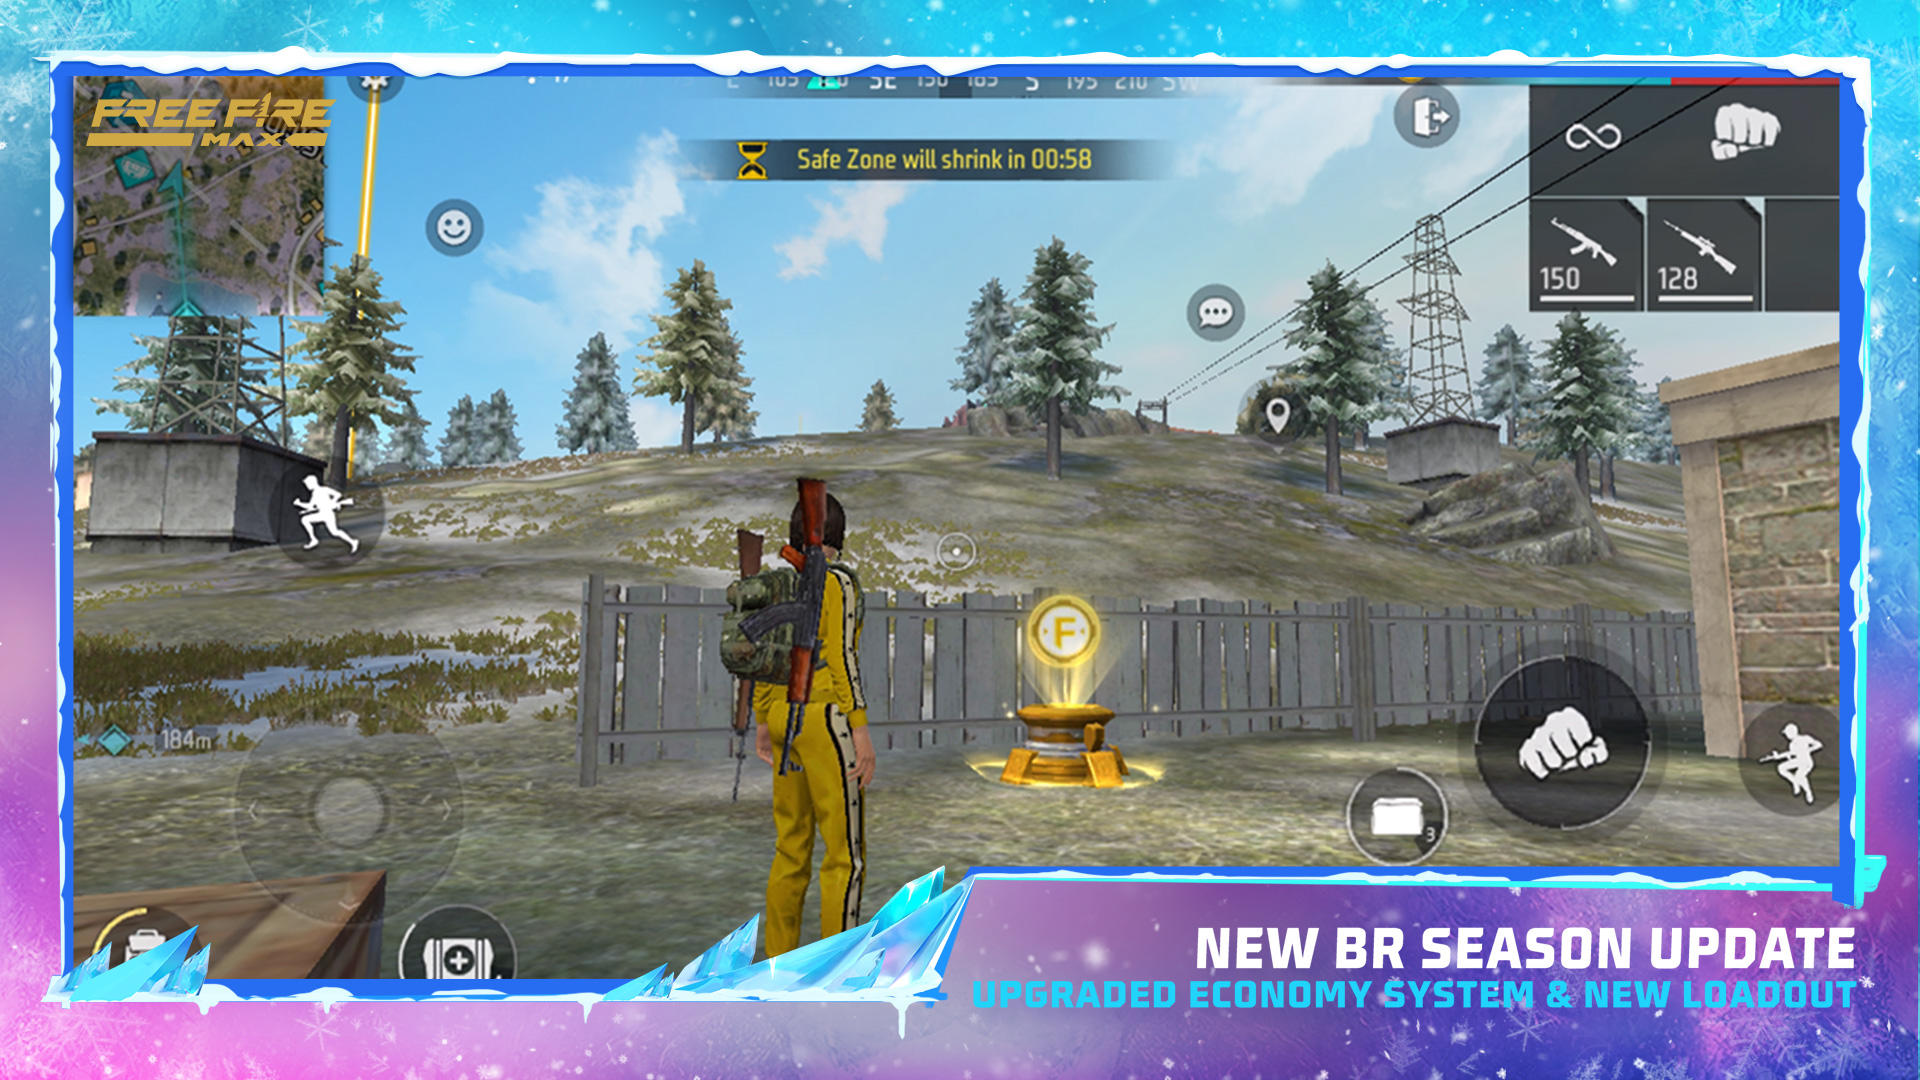 free fire redeem codes: Garena Free Fire Max: Redeem codes for March 17.  Get weapons, diamonds, and other items - The Economic Times